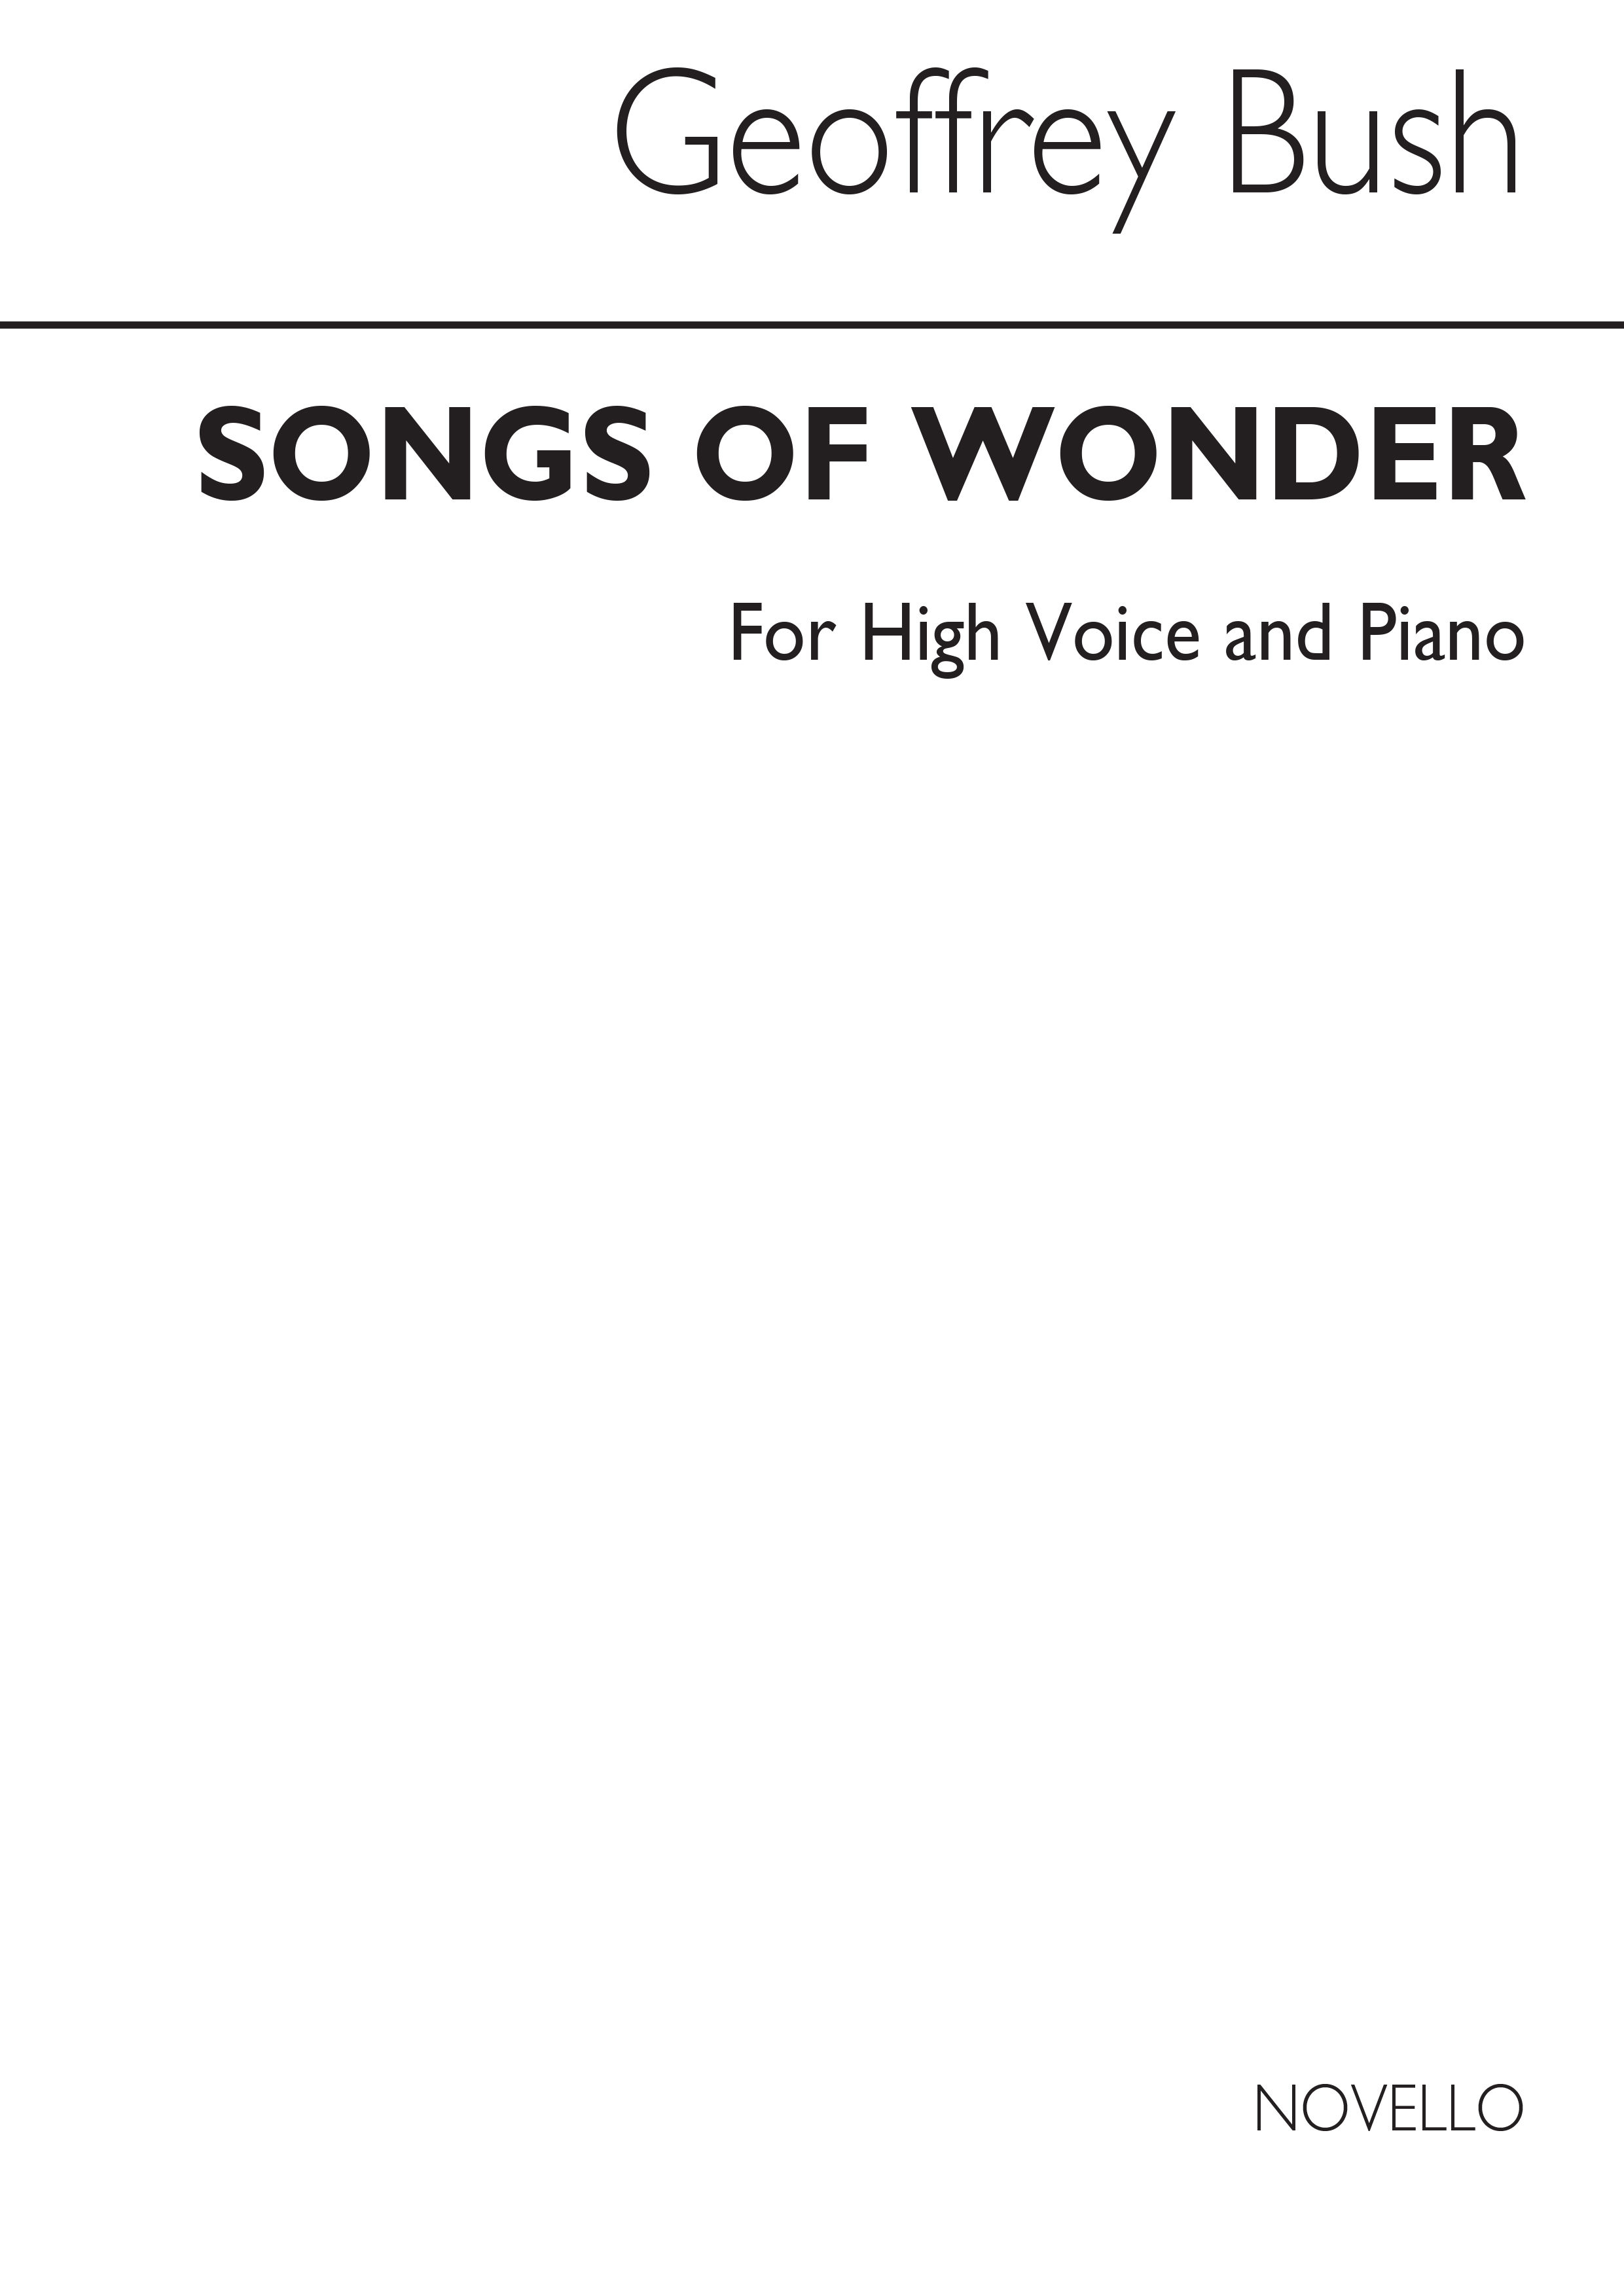 Geoffrey Bush: Songs Of Wonder for High Voice and Piano: High Voice: